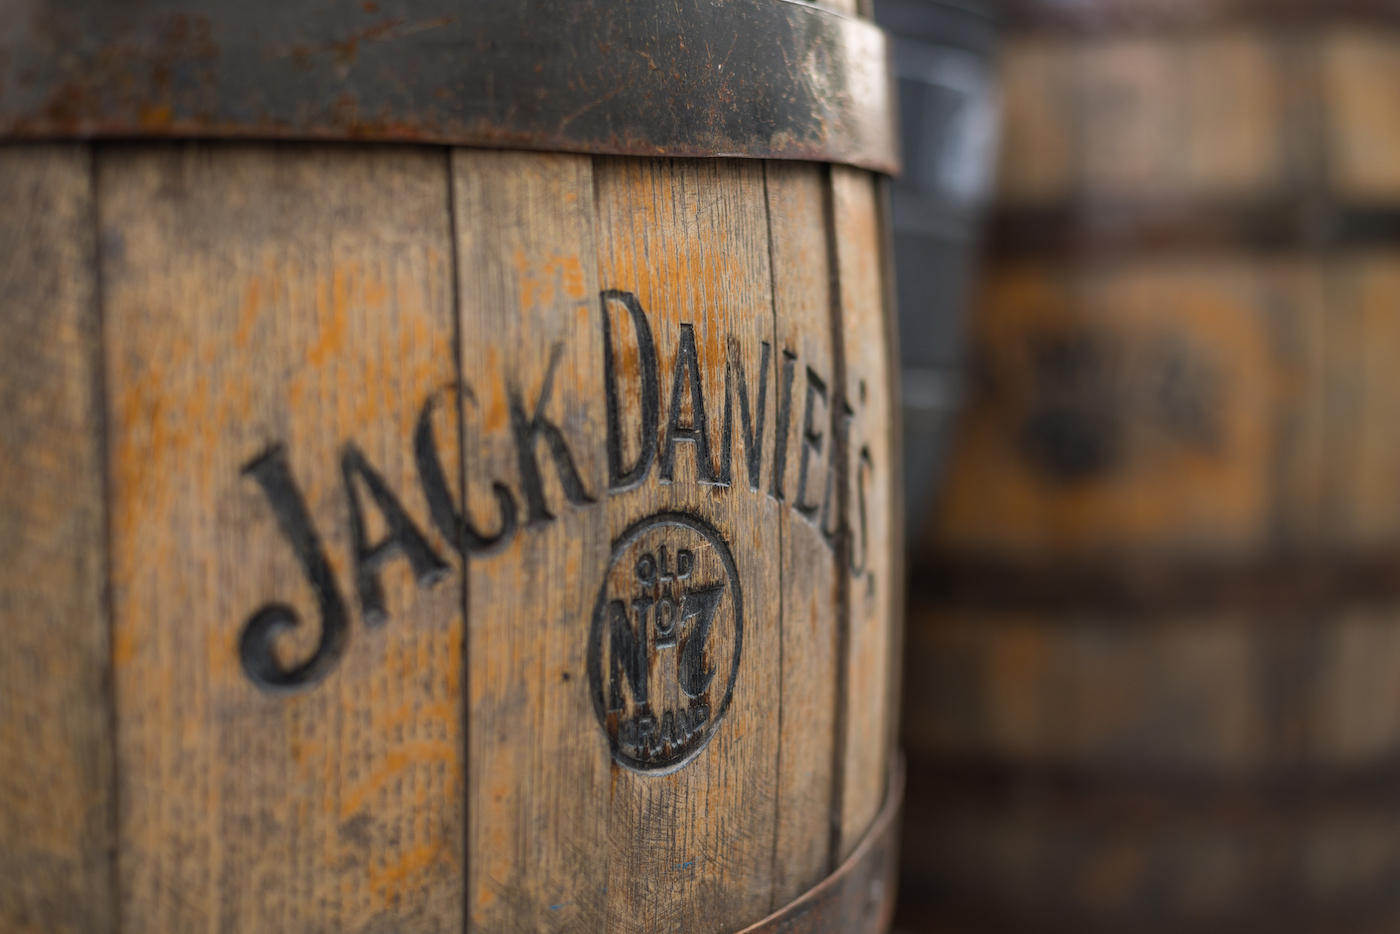 Burned logo of the famous Jack Daniel's whiskey at the old wooden barrel.